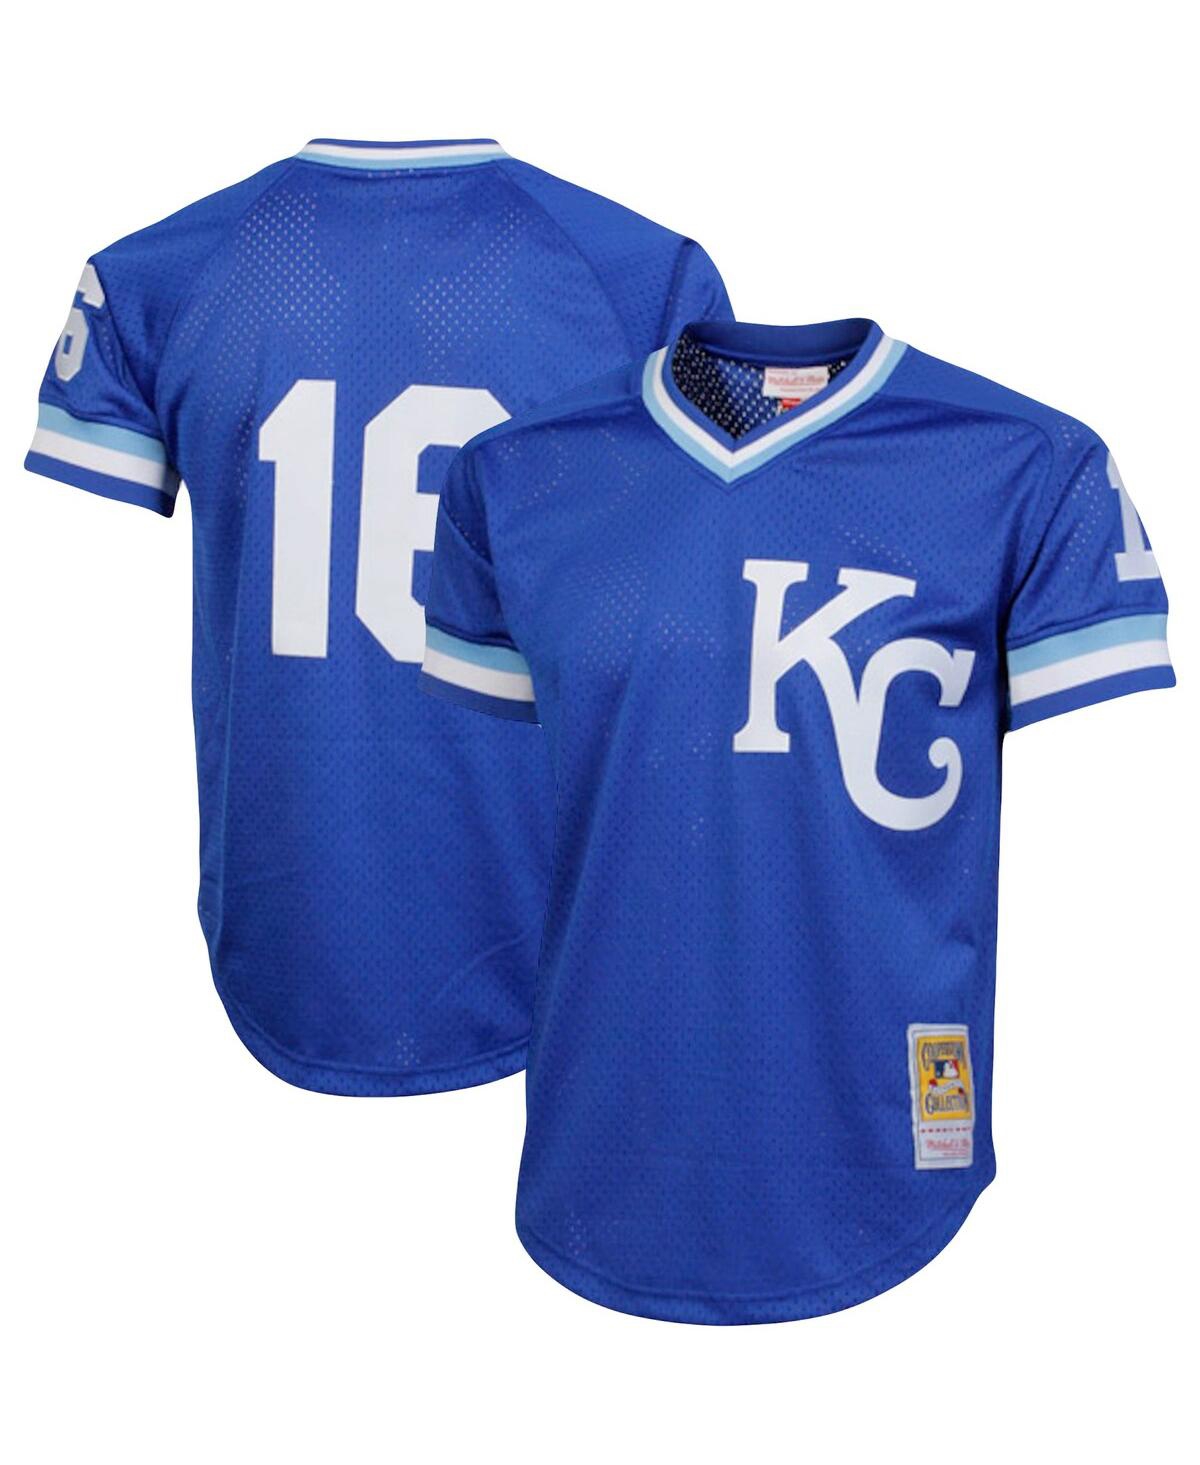 Men's Mitchell & Ness Bo Jackson Royal Kansas City Royals Cooperstown Collection Big and Tall Mesh Batting Practice Jersey - Royal